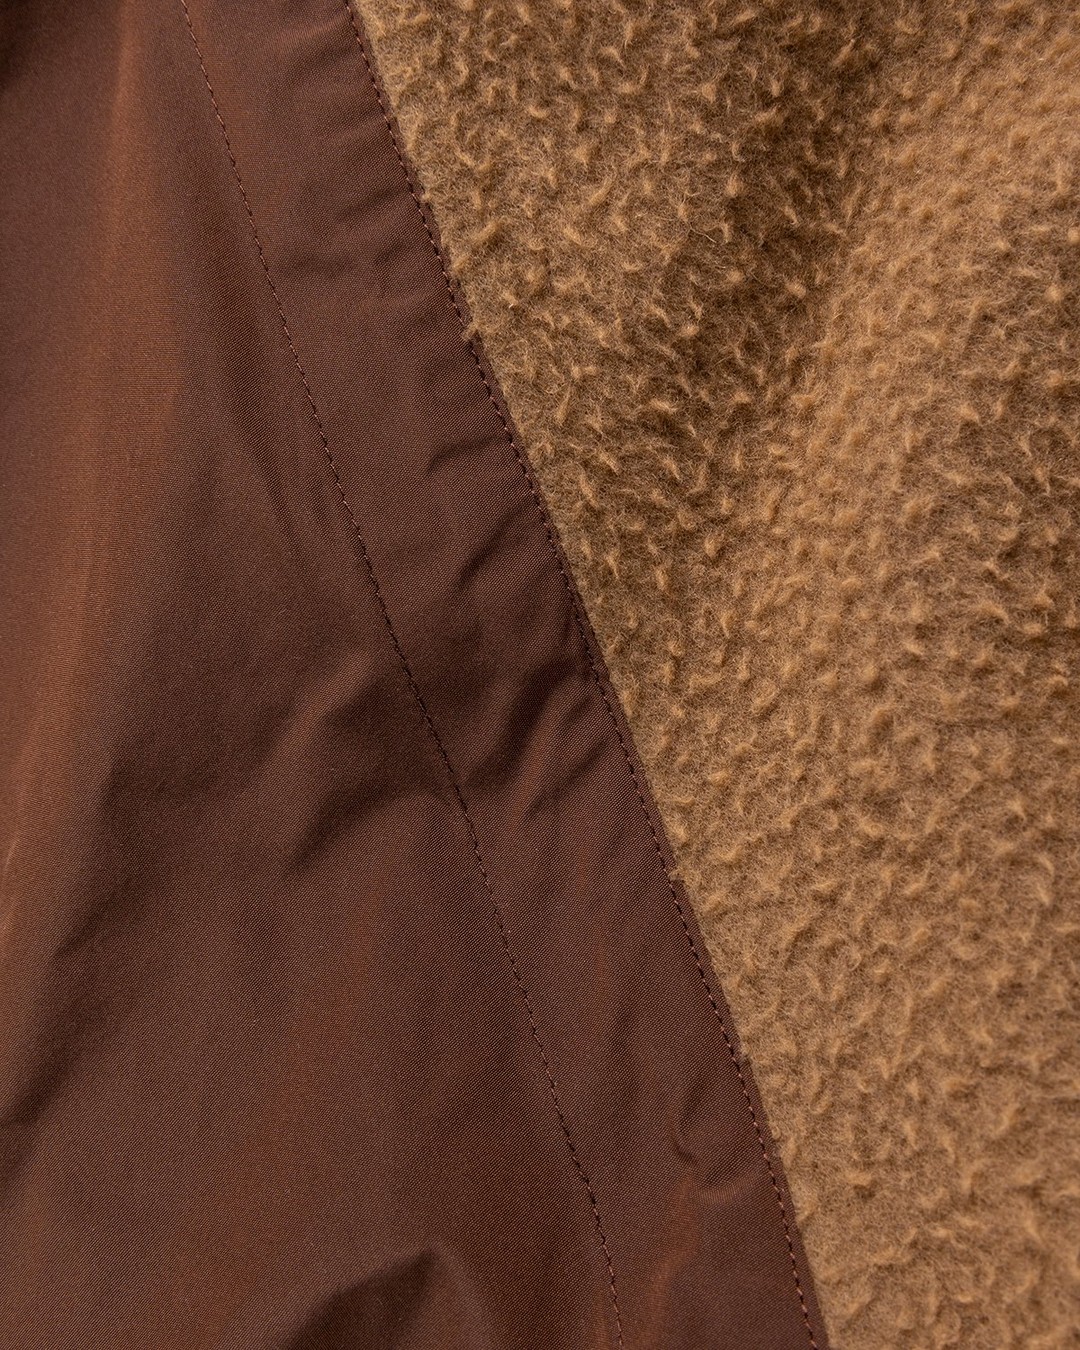 Arnar Mar Jonsson – Patch Pocket Hooded Tracktop Caramel Chocolate - Outerwear - Brown - Image 5